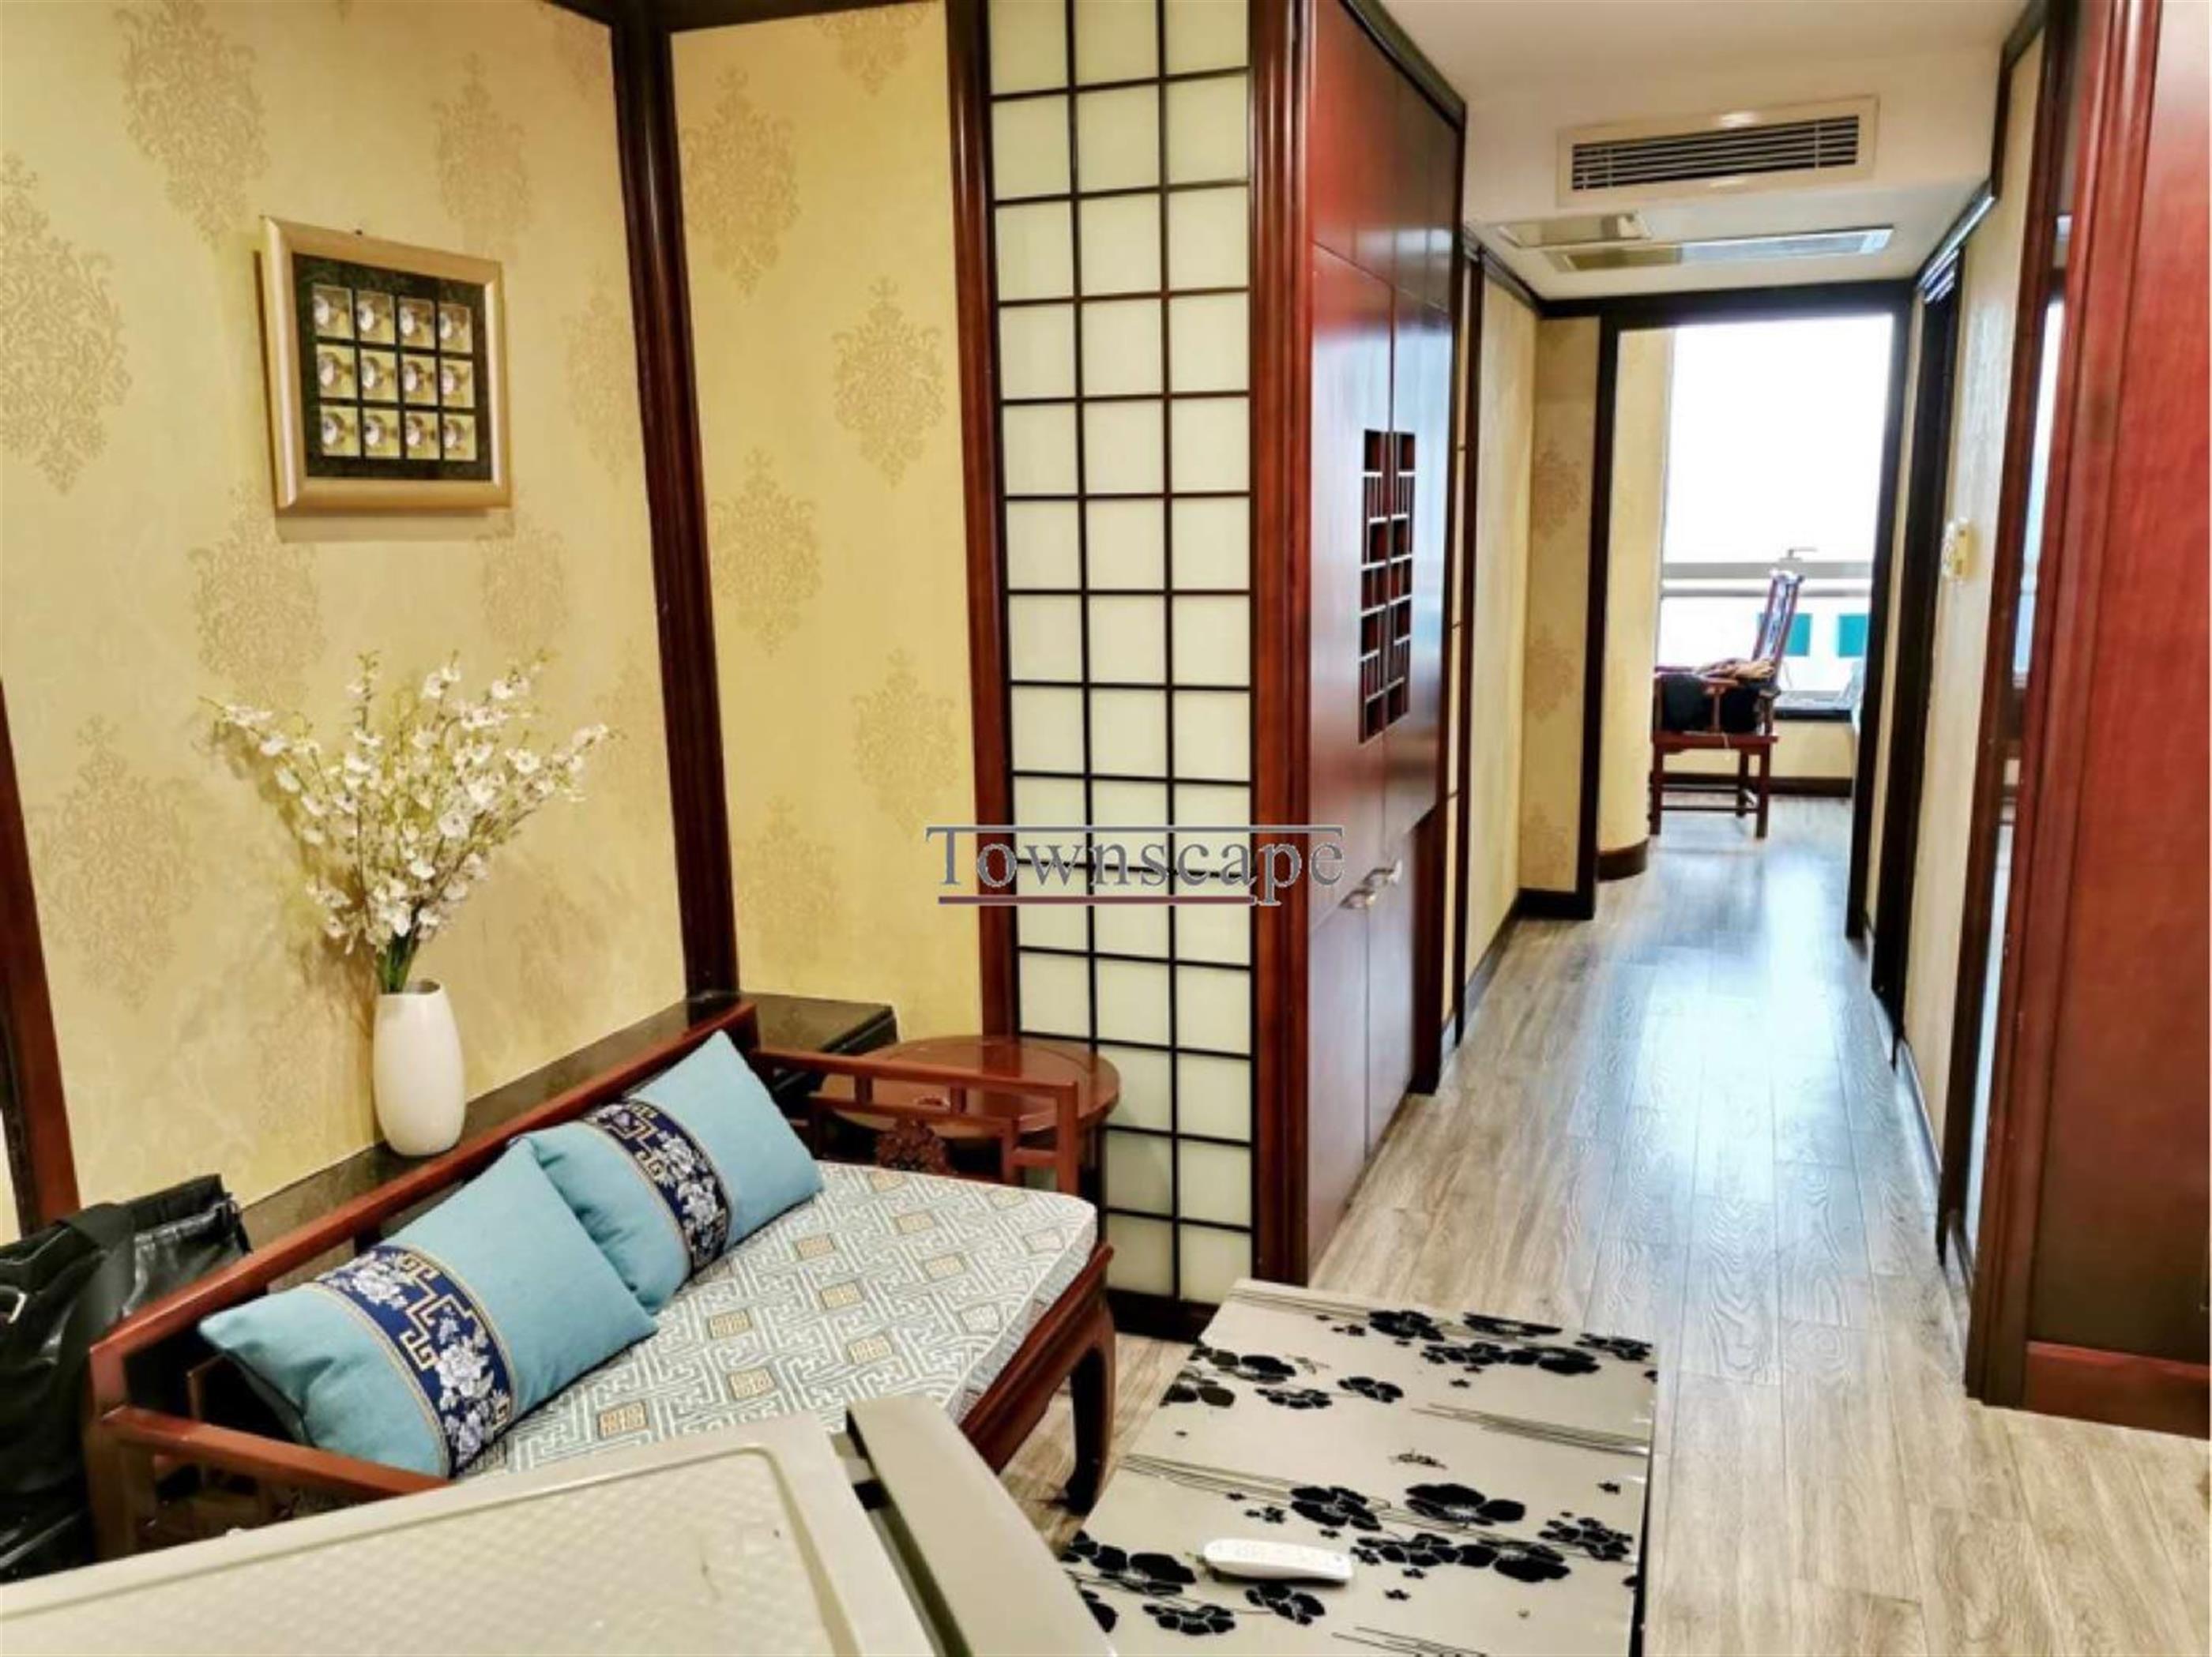 bright apartment Comfortable Cozy West Nanjing Road 1BR Apartment nr LN 2/12/13 for Rent in Shanghai